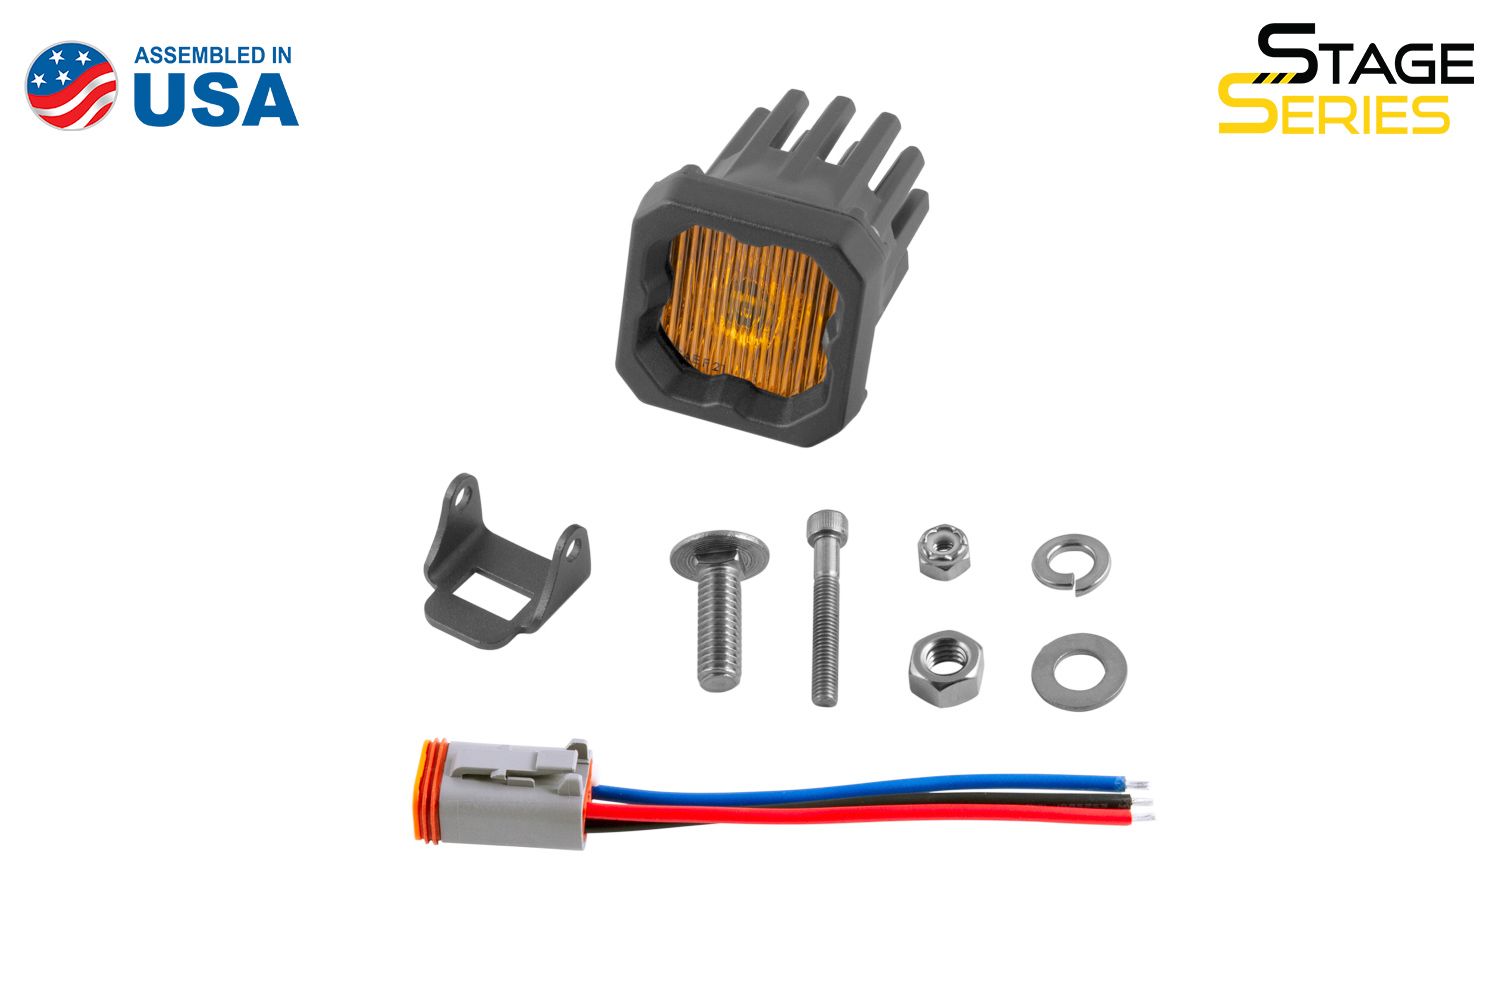 Stage Series C1 Yellow SAE Fog Standard LED Pod (one)